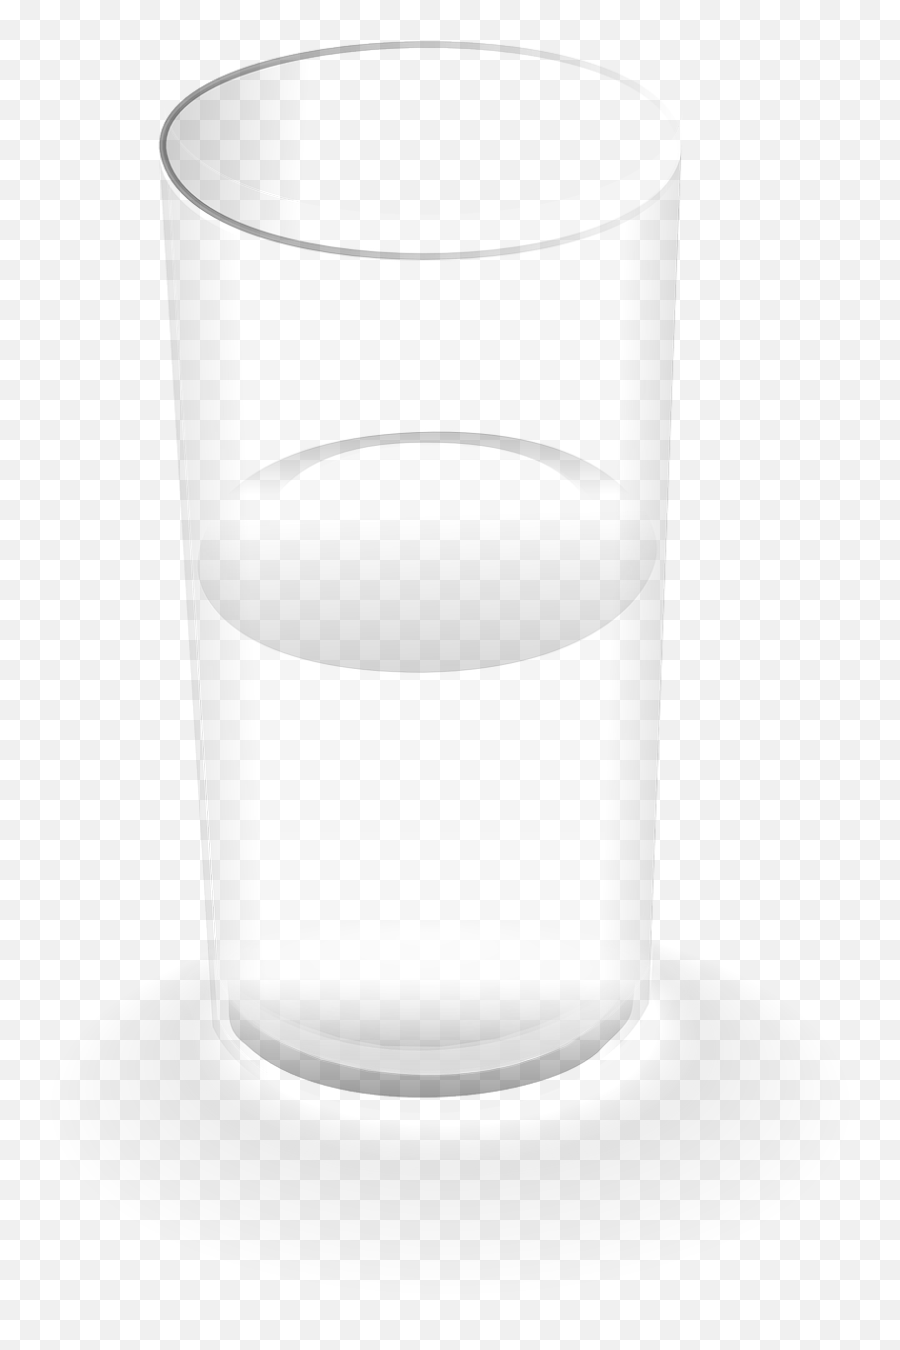 Watercupbeveragesdrinkingdrink - Free Image From Needpixcom Drink Png,Water Clipart Transparent